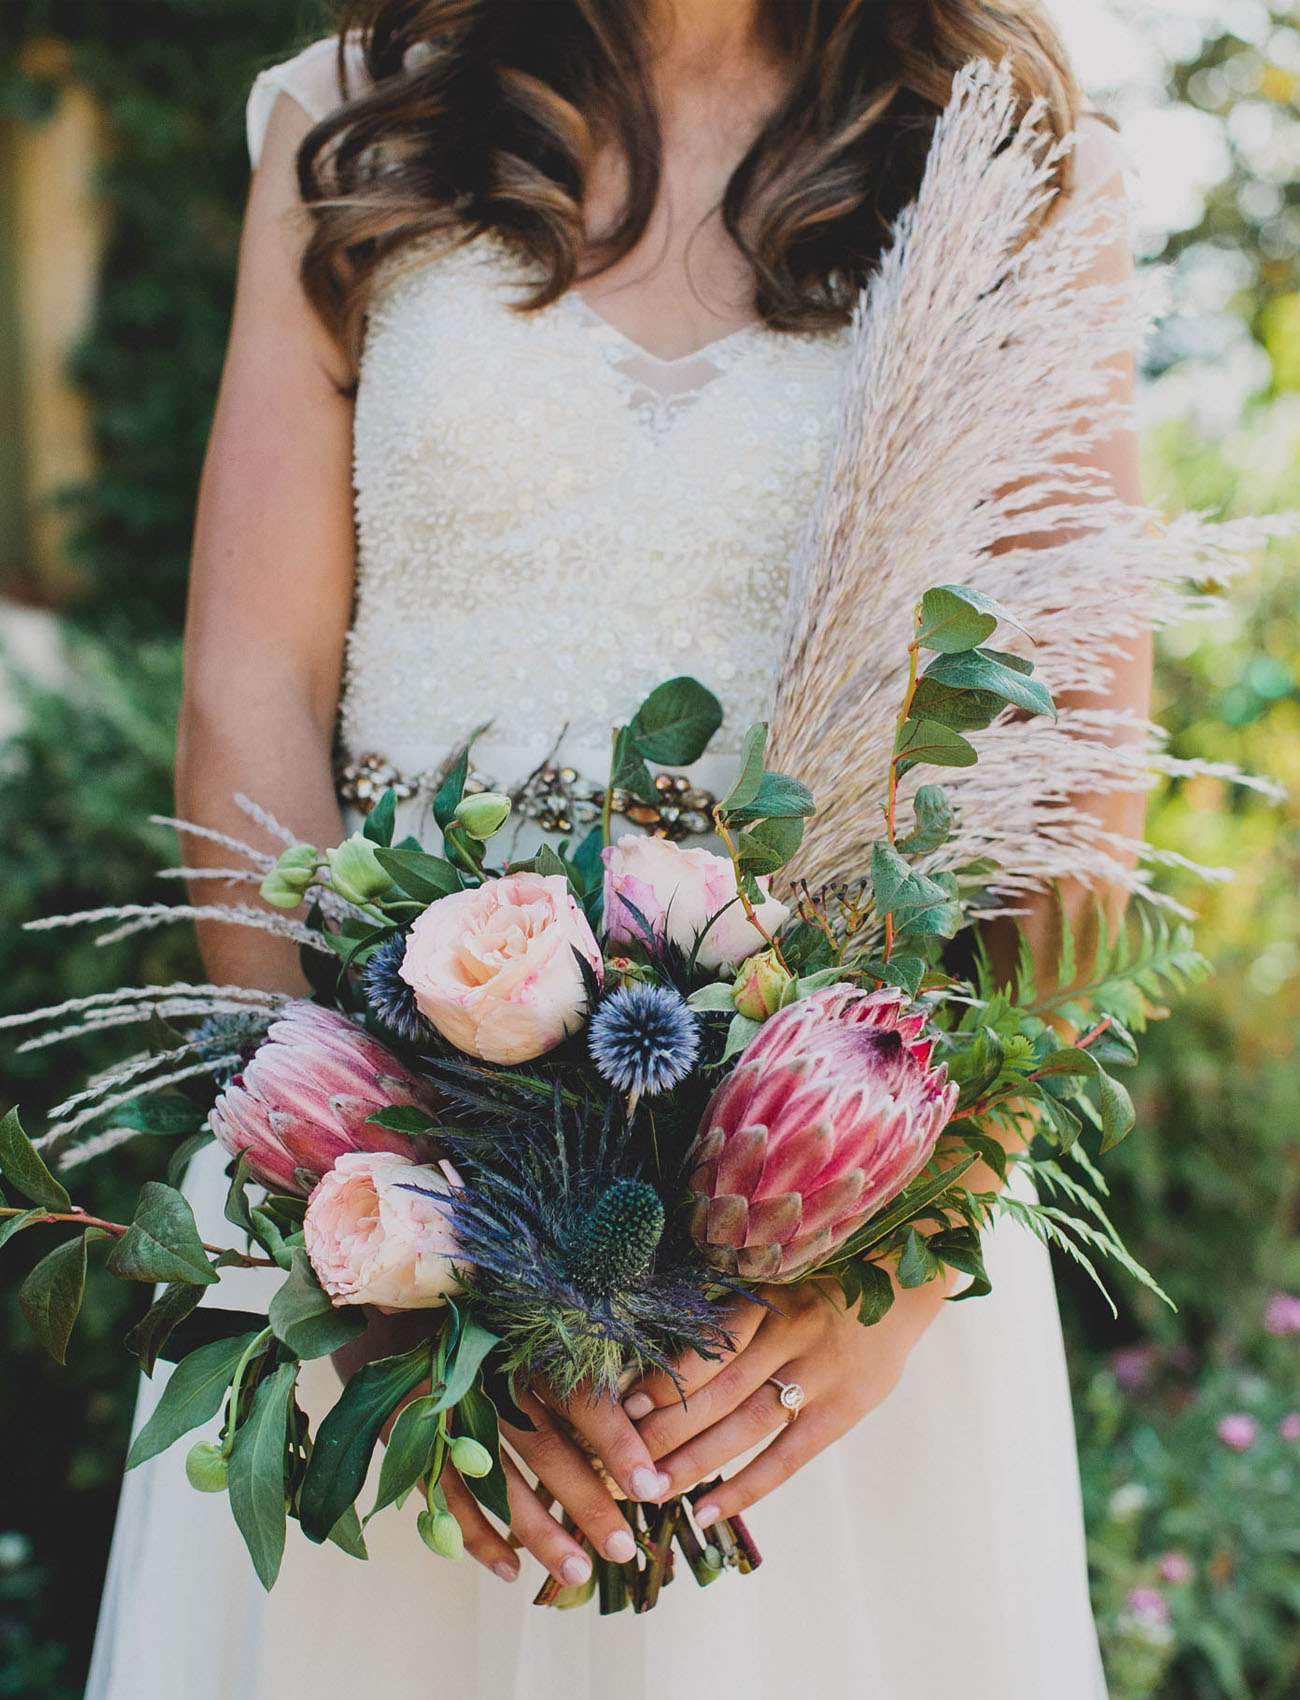 Bridal bouquet with pampas grass, greeneries and blush and blue flowers.